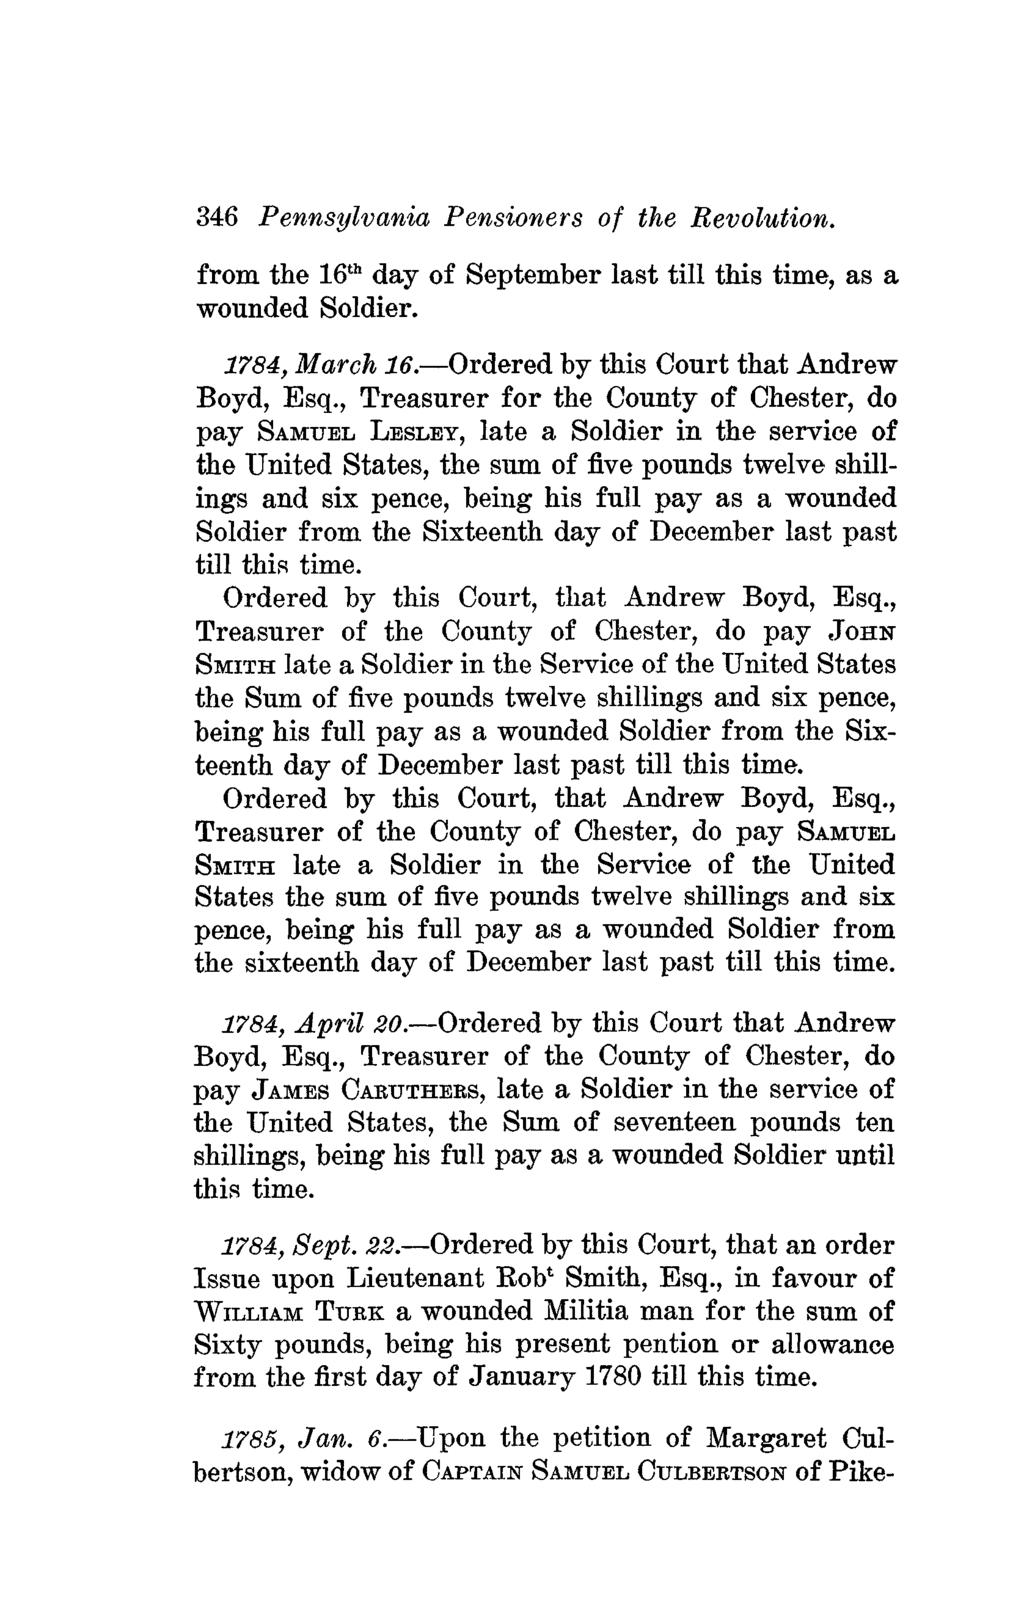 346 Pennsylvania Pensioners of the Revolution. from the 16 th day of September last till this time, as a wounded Soldier. 1784, March 16. Ordered by this Court that Andrew Boyd, Esq.